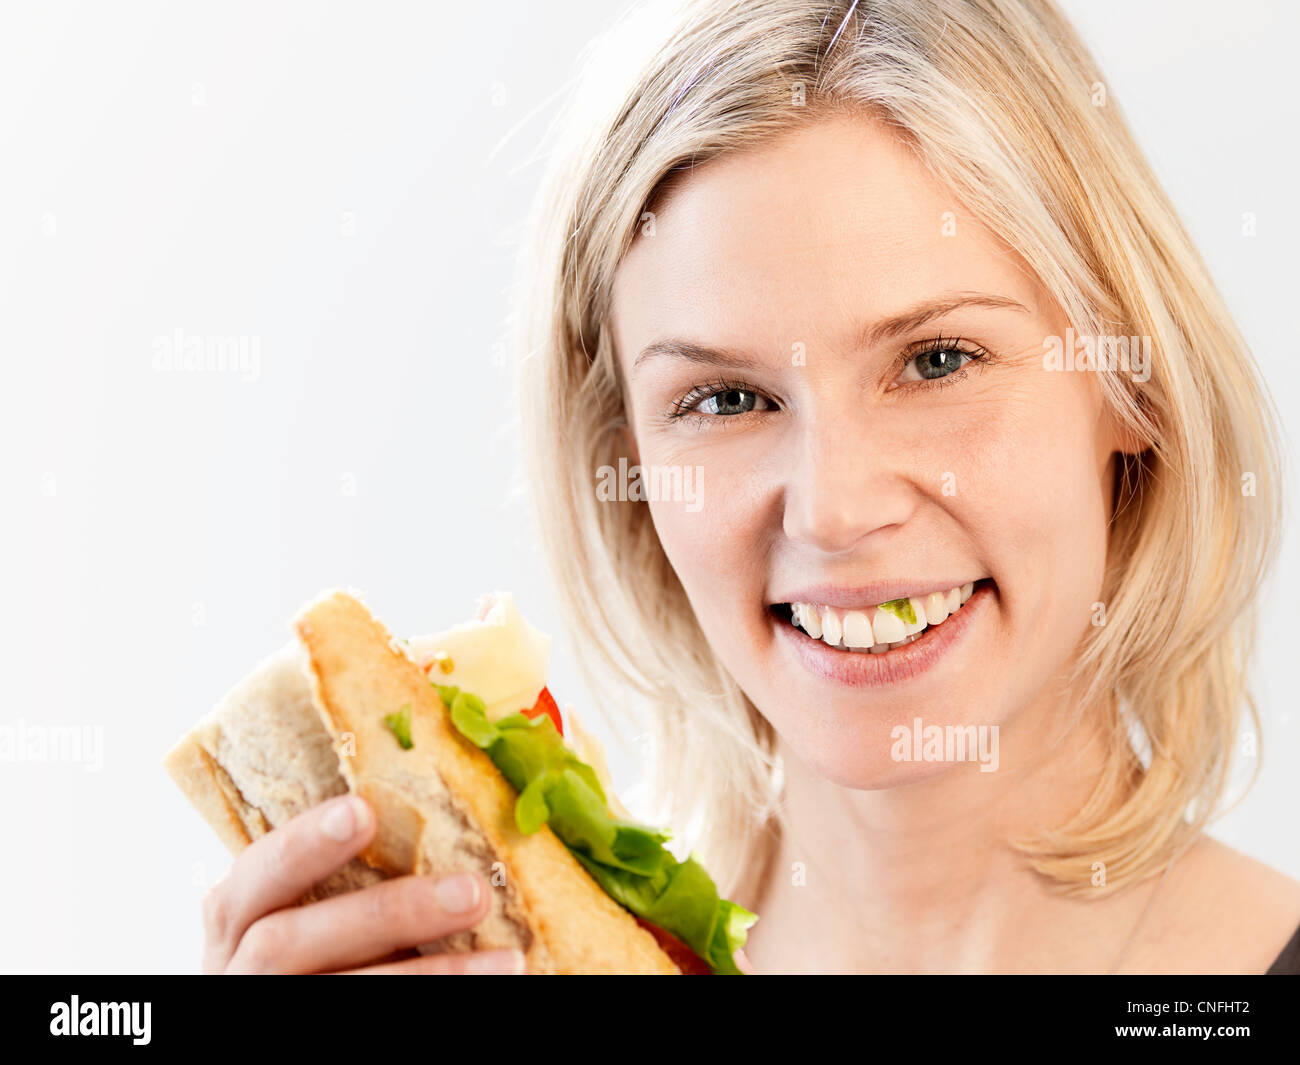 Woman smiling with lettuce caught in teeth, studio shot Stock Photo